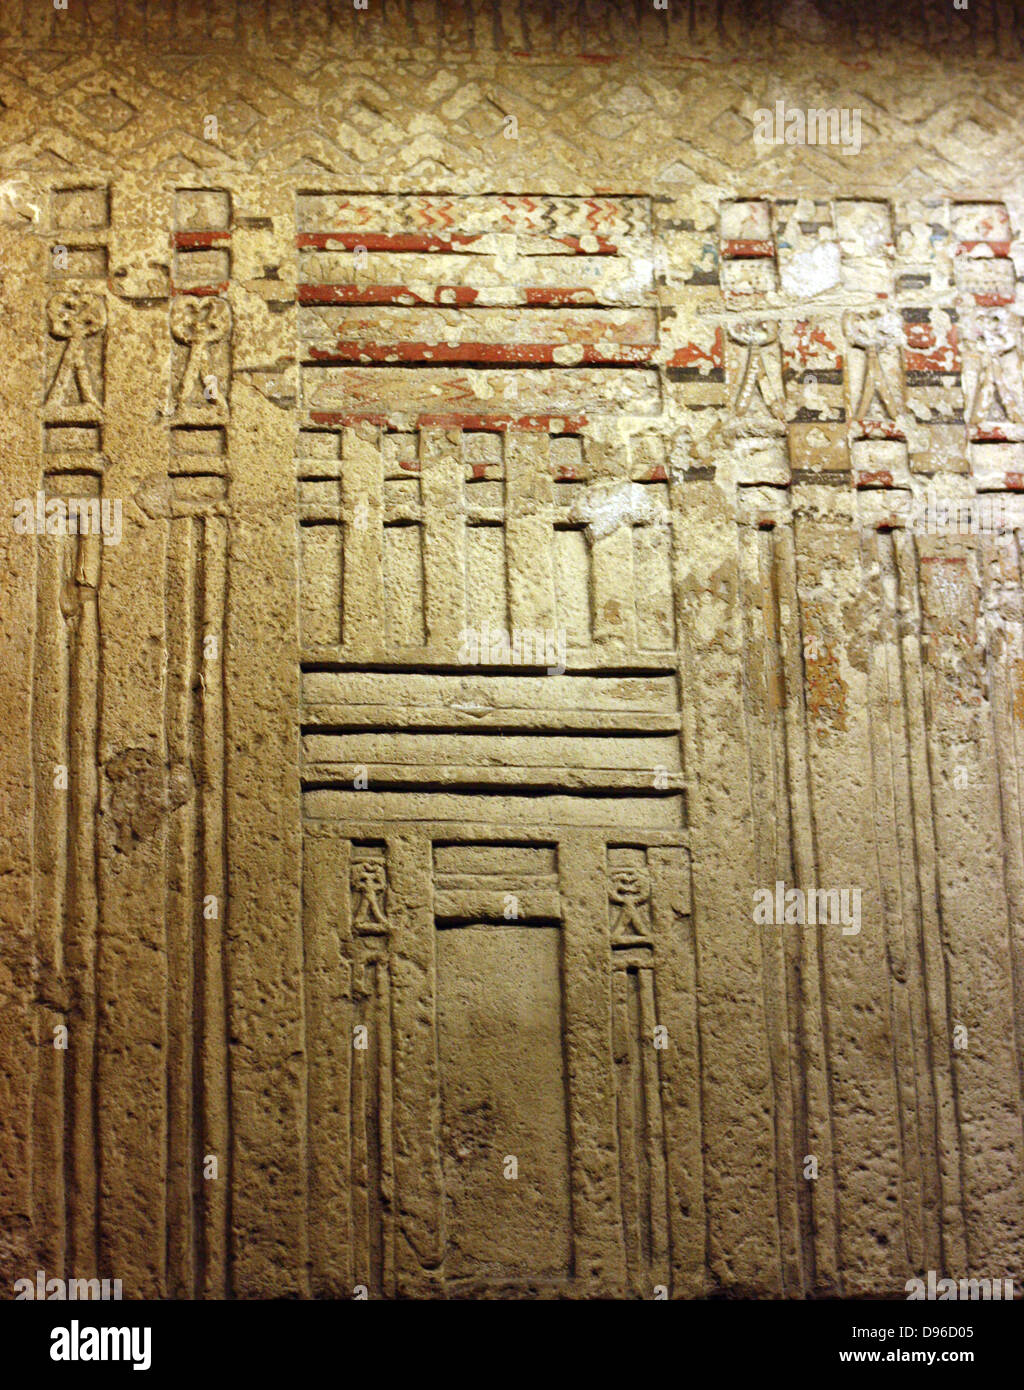 False door of Tjetji and his wife Debet. Limestone, Fourth or Fifth Dynasty, about 2500-2400 BC. From the tomb of Tjetji at Giza. This door comes from the same tomb. False doors were the main place for making offerings in the Old Kingdom. One of the dead person's spirits would pass through the door between the worlds of the dean and the living. The Central panel of this door shoes Tjeji and Debet receiving offerings, They appear on the side panels with their children. Stock Photo